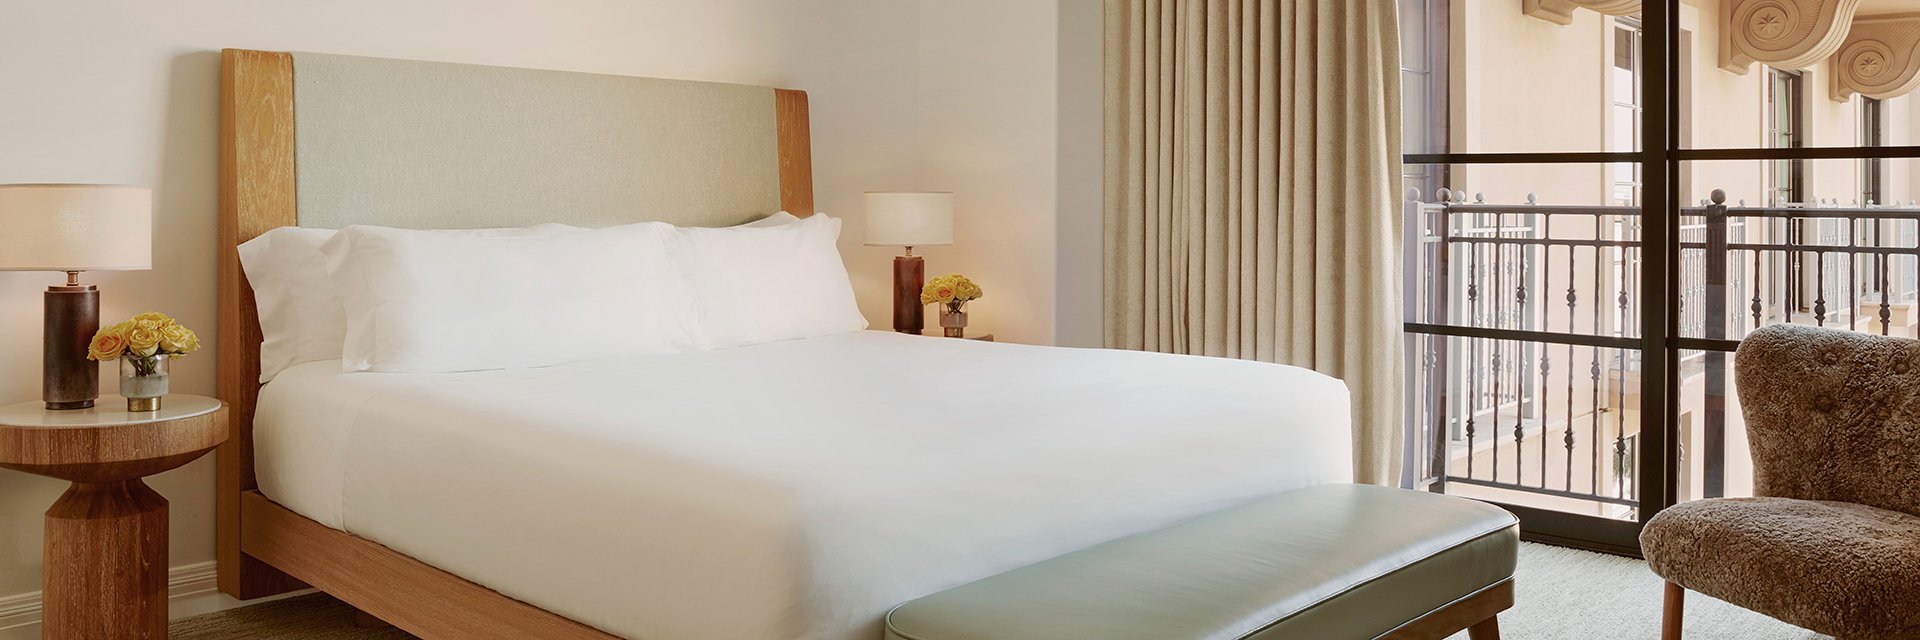 A king sized bed with white sheets in a hotel bedroom. There are yellow roses in glass vases on nightstands and a window.